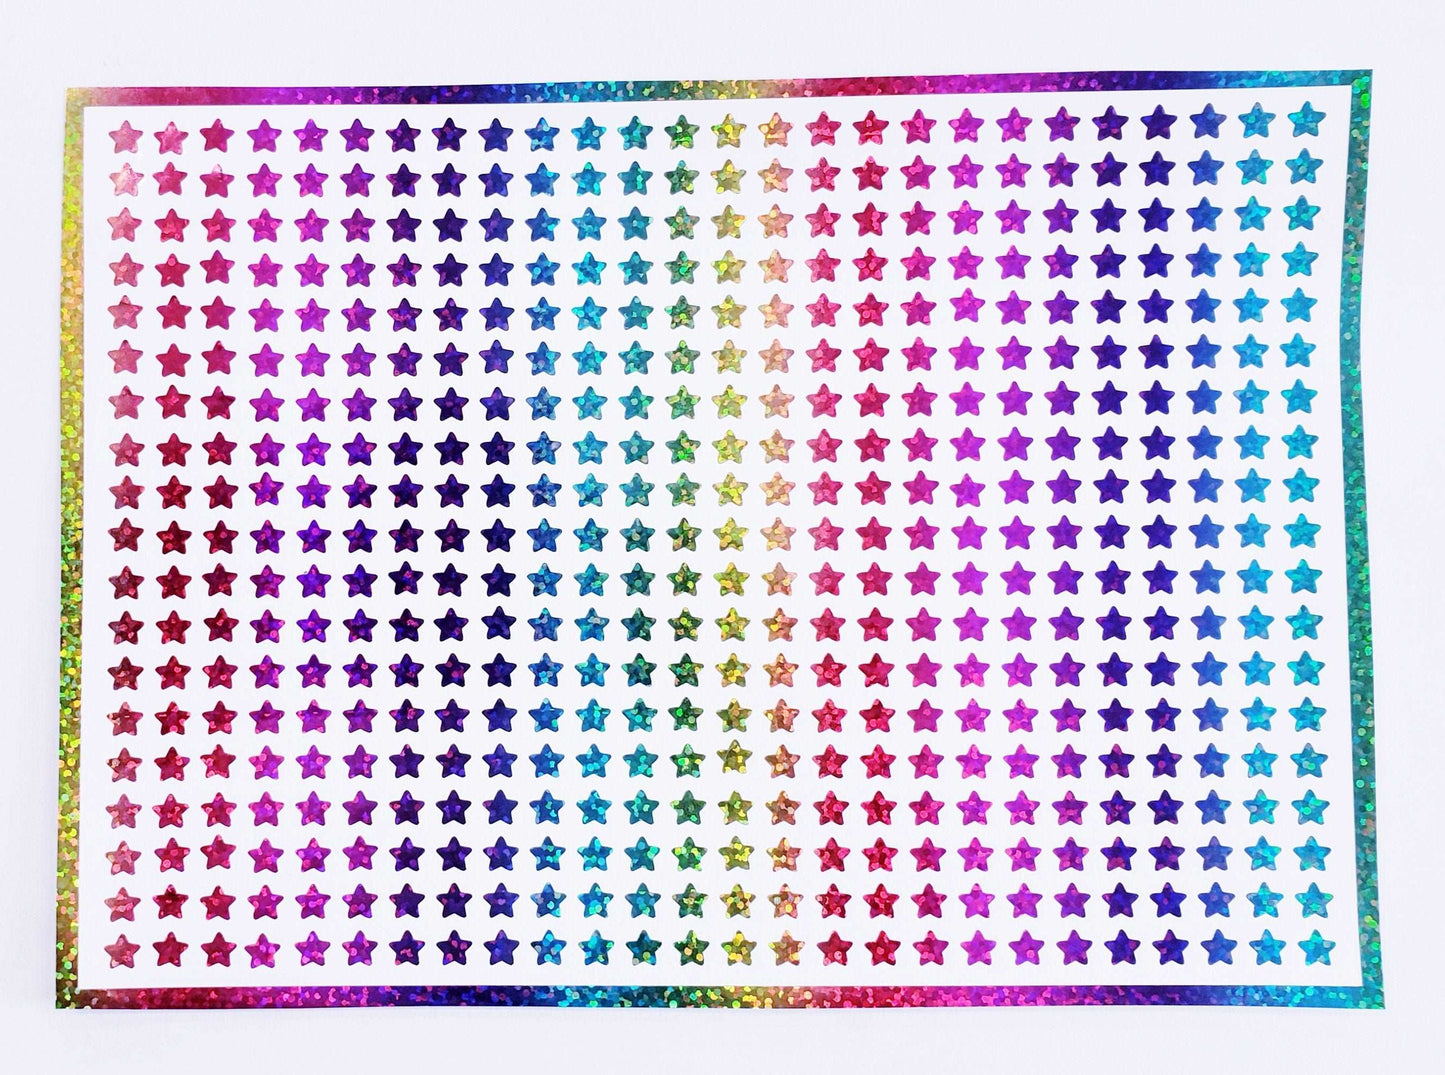 Extra Small Star Stickers, set of 490 rainbow glitter star stickers for bullet journals, notebooks, toploader card sleeves and planners.